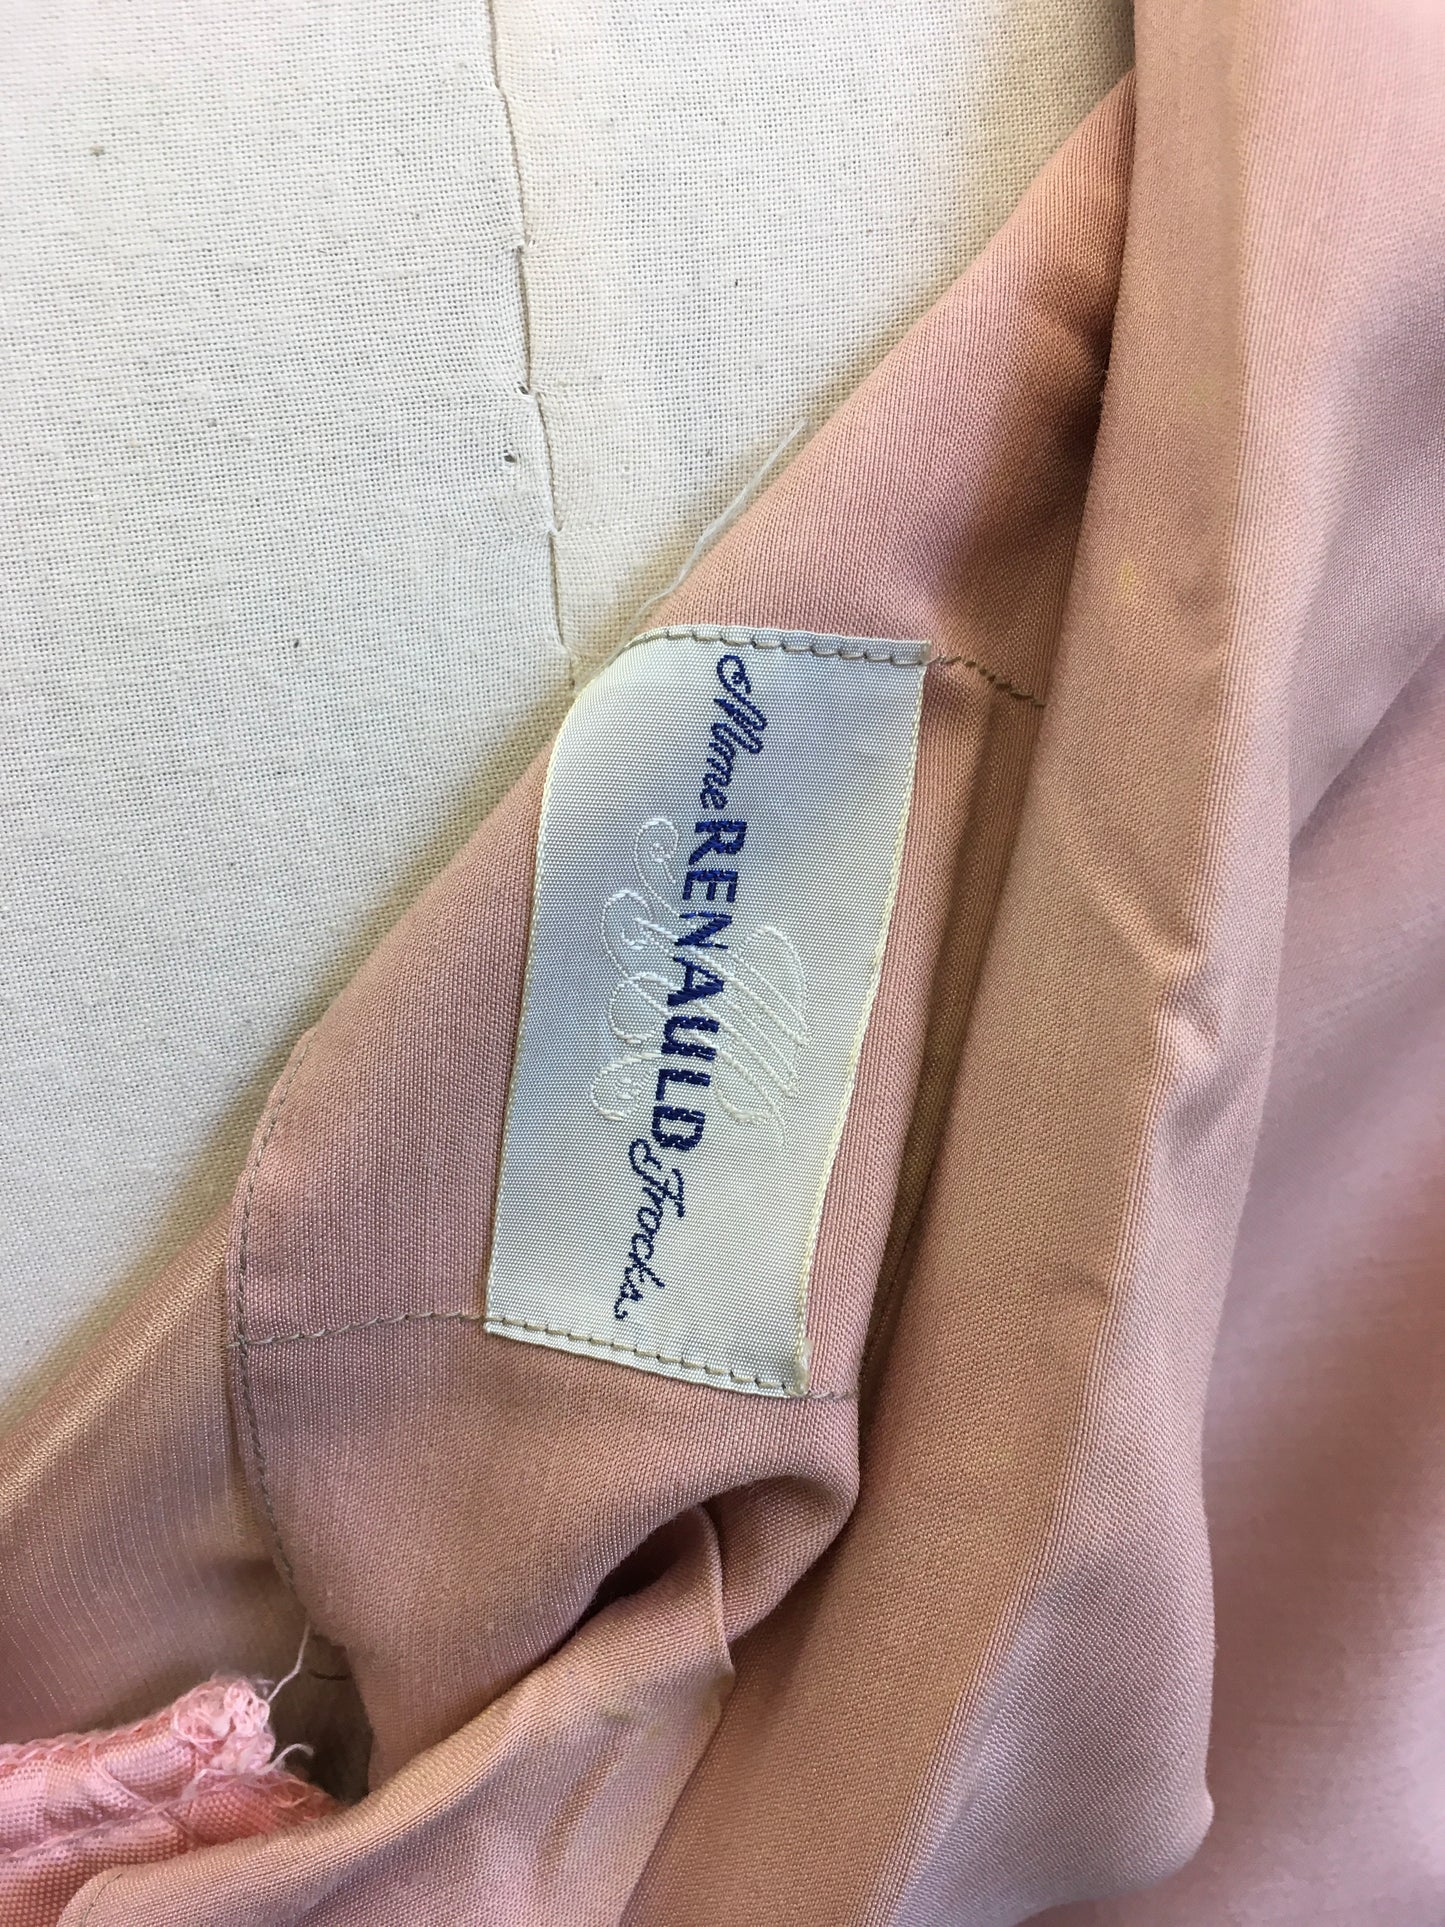 Original 1940’s Volup 2pc Suit by ‘ Renauld Frocks ‘ - In A Dusky Pink Silk